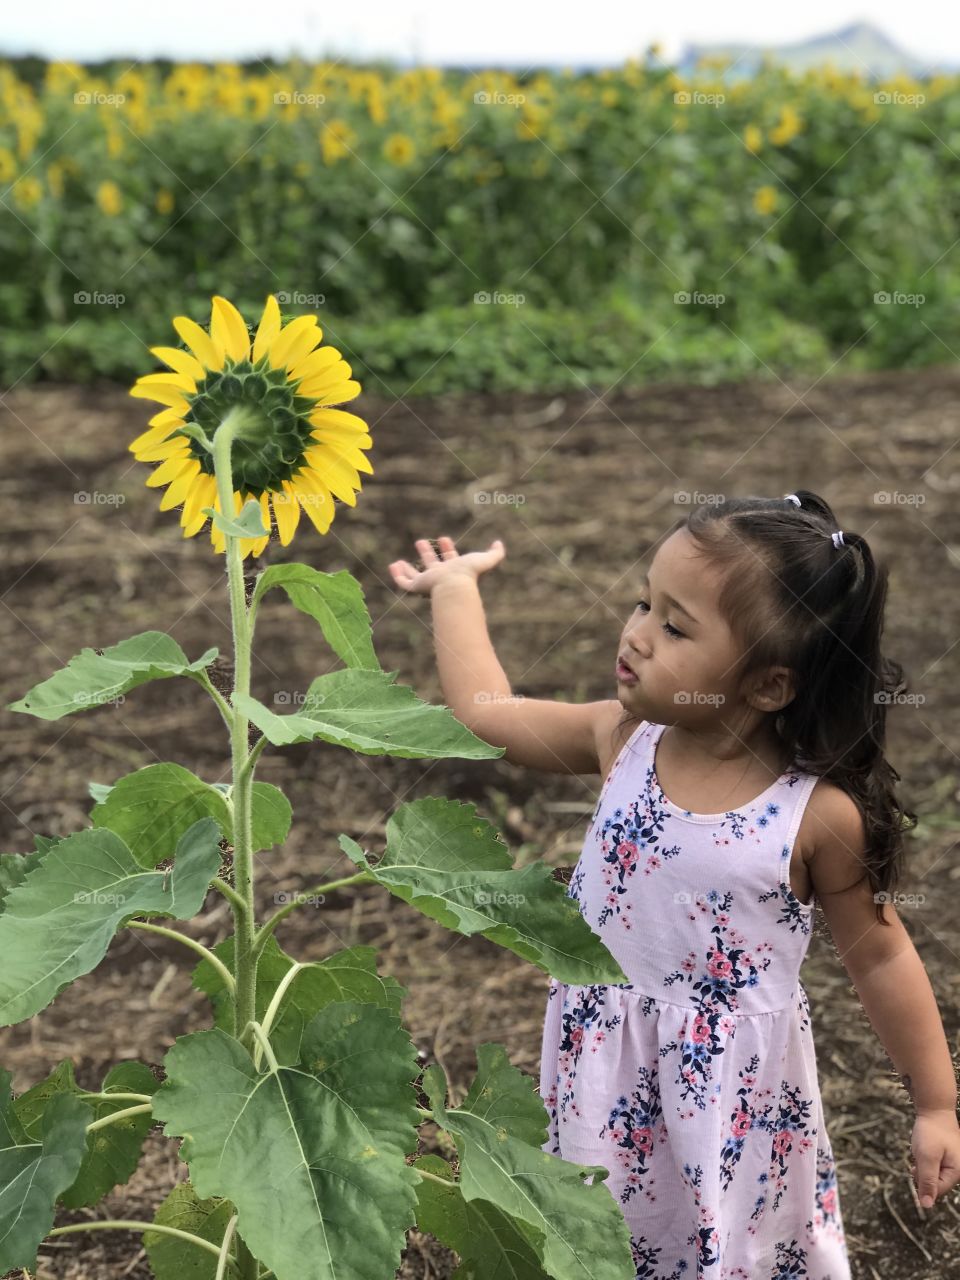 Curious toddler. Undecided if she want to touch the flower or not :) 